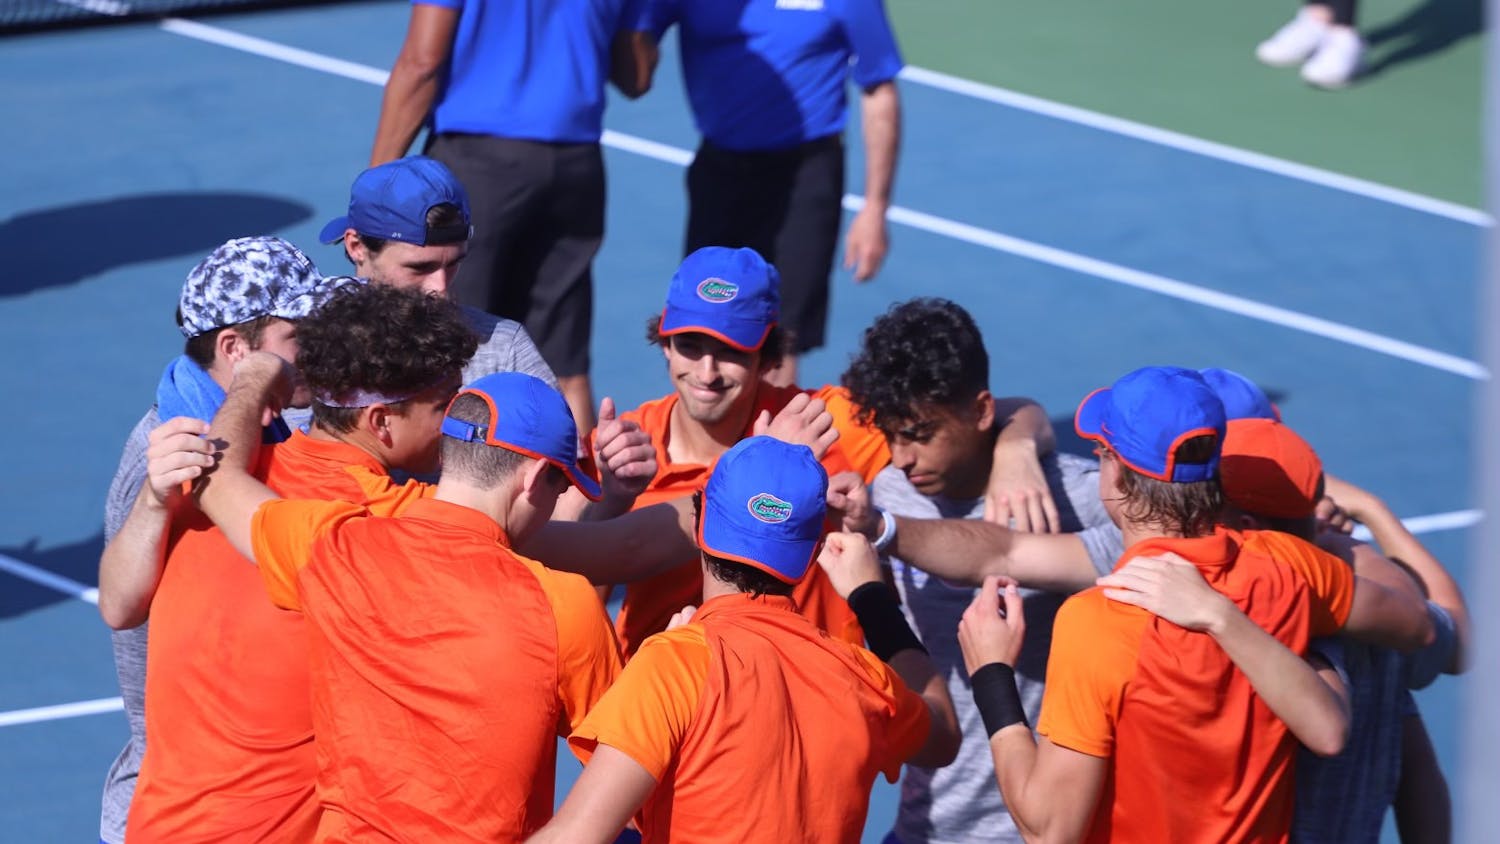 Florida men&#x27;s tennis will be without six key players from last year&#x27;s team. This puts new responsibility on returning players and opens the door for hopeful newcomers. 